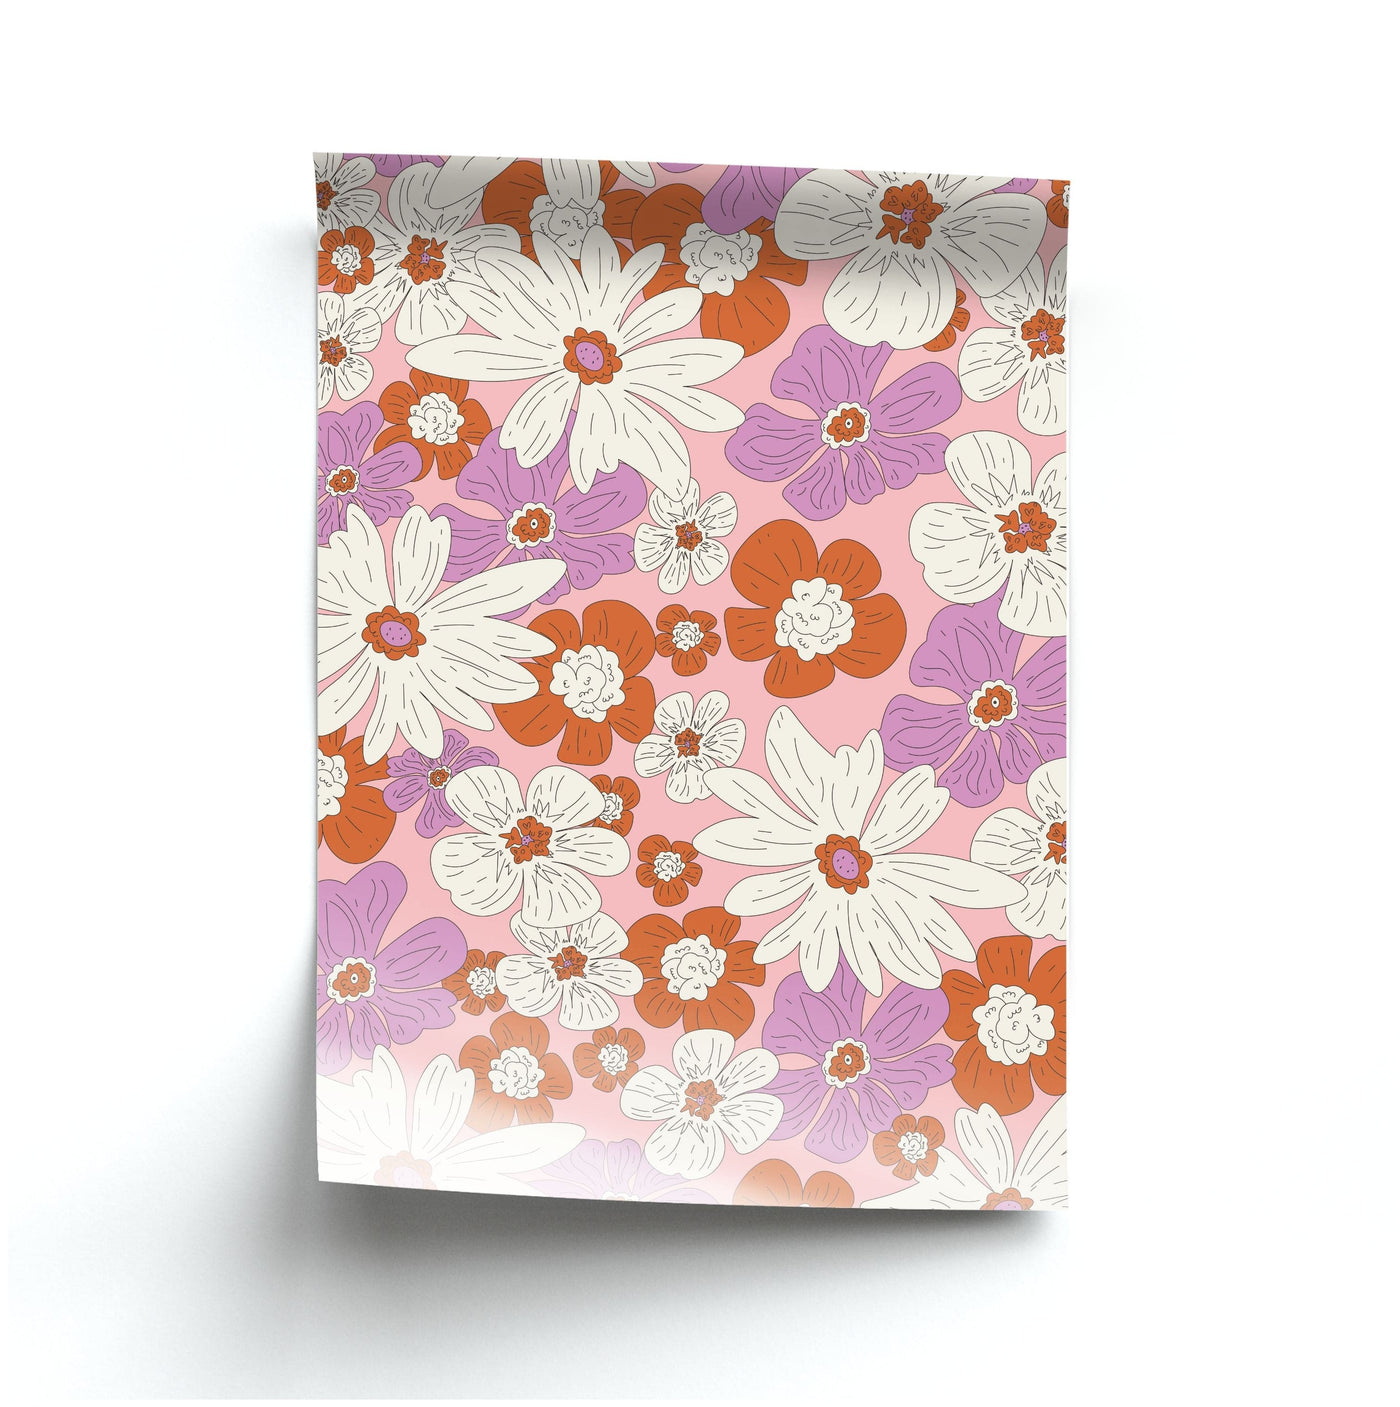 Retro Flowers - Floral Patterns Poster